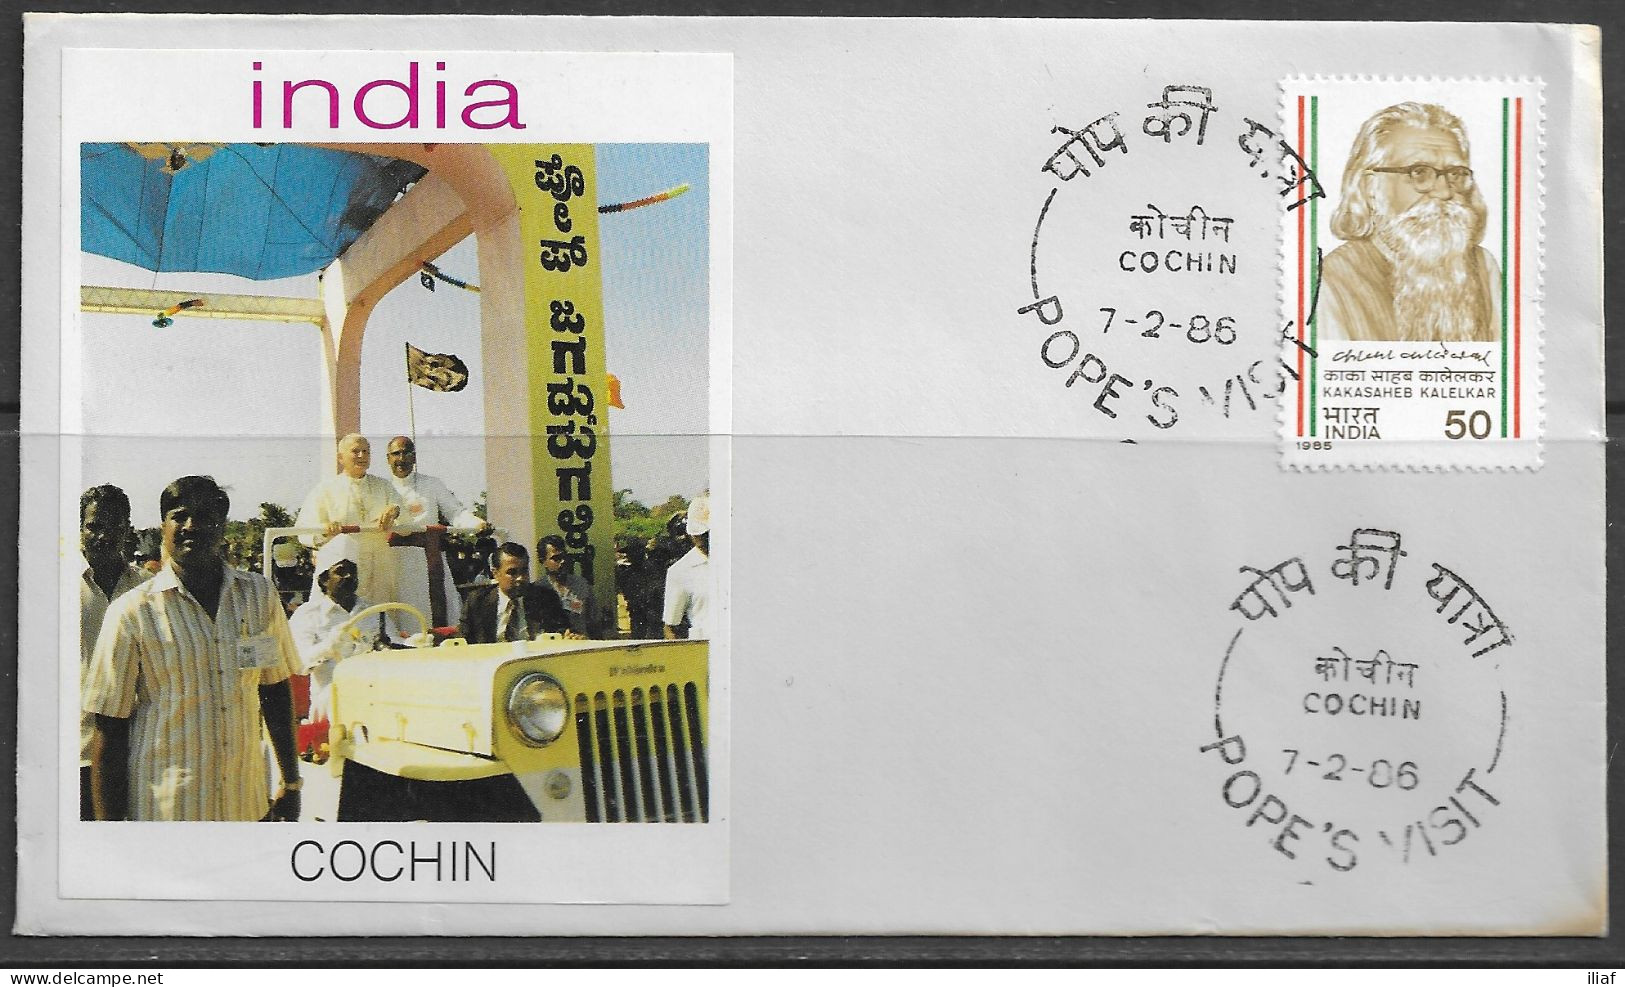 India.   Pastoral Visit Of Pope John Paul II To India, Cochin.  Special Cancellation On Cachet Special Envelope - Covers & Documents